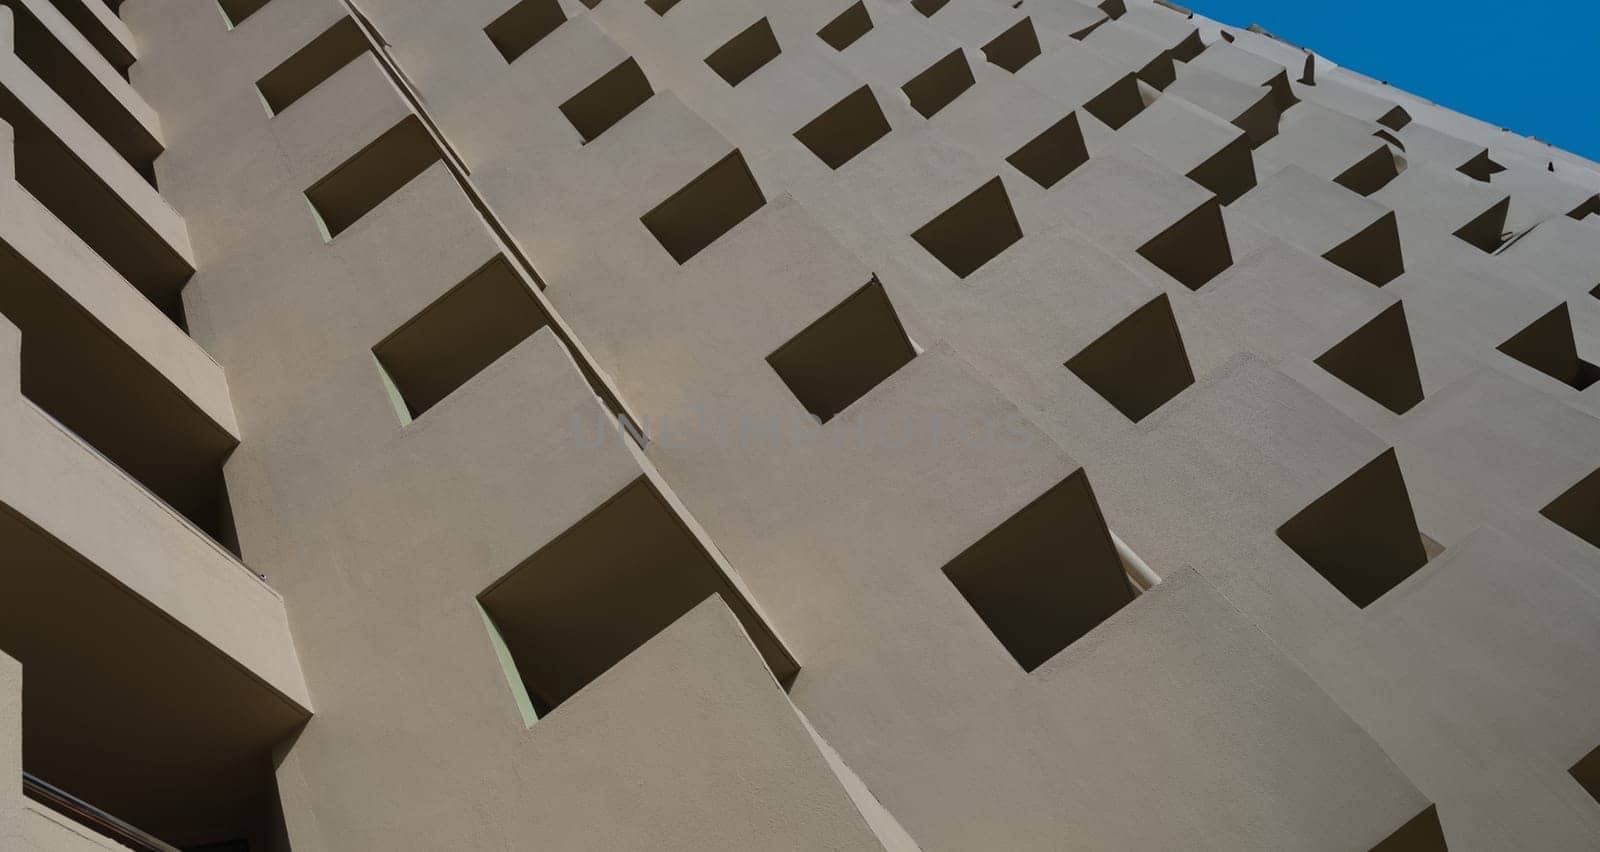 Facade of brown building with square patterns closeup background. Building design and architecture concept